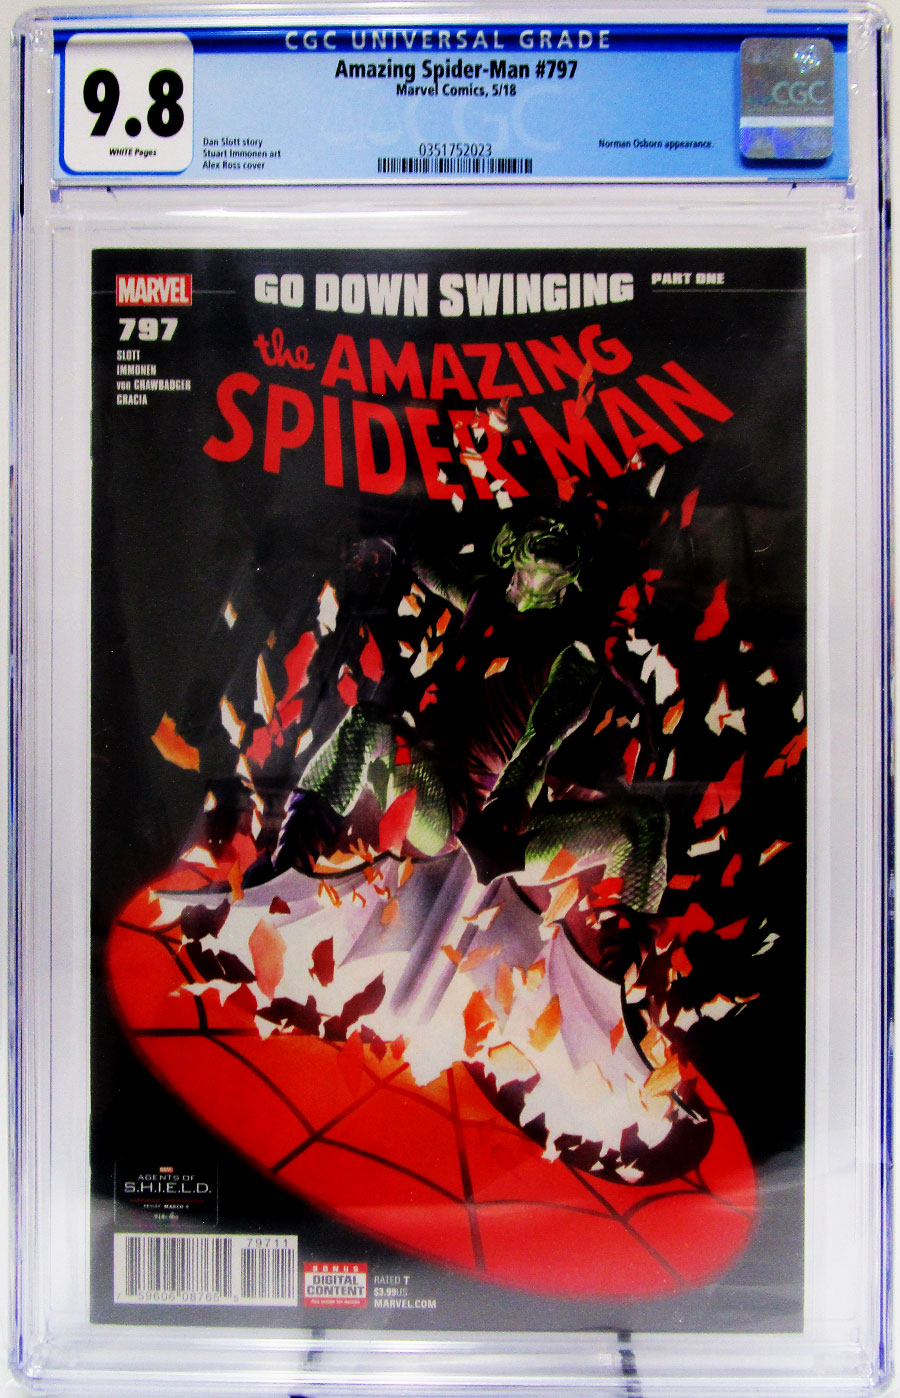 Amazing Spider-Man Vol 4 #797 Cover L 1st Ptg Regular Alex Ross Cover CGC 9.8 (Marvel Legacy Tie-In)